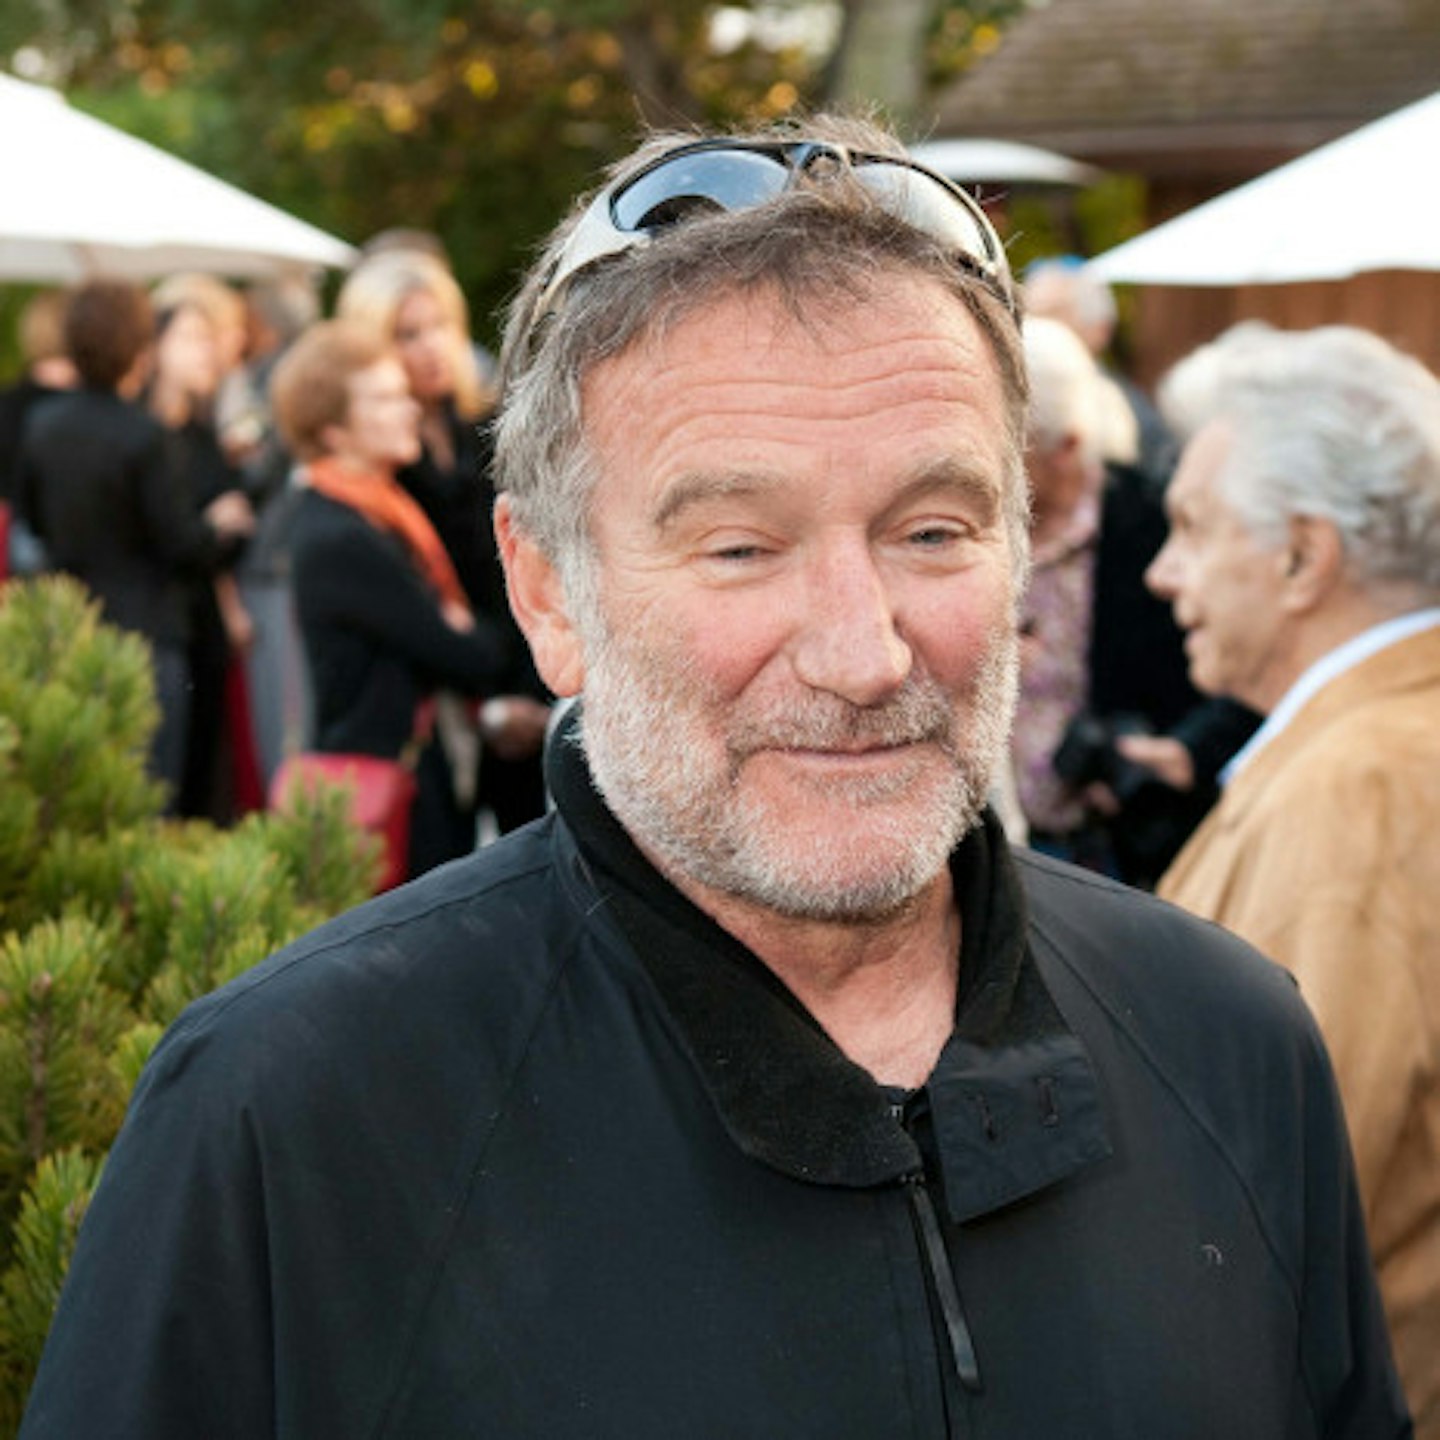 Robin Williams passed away at the age of 63